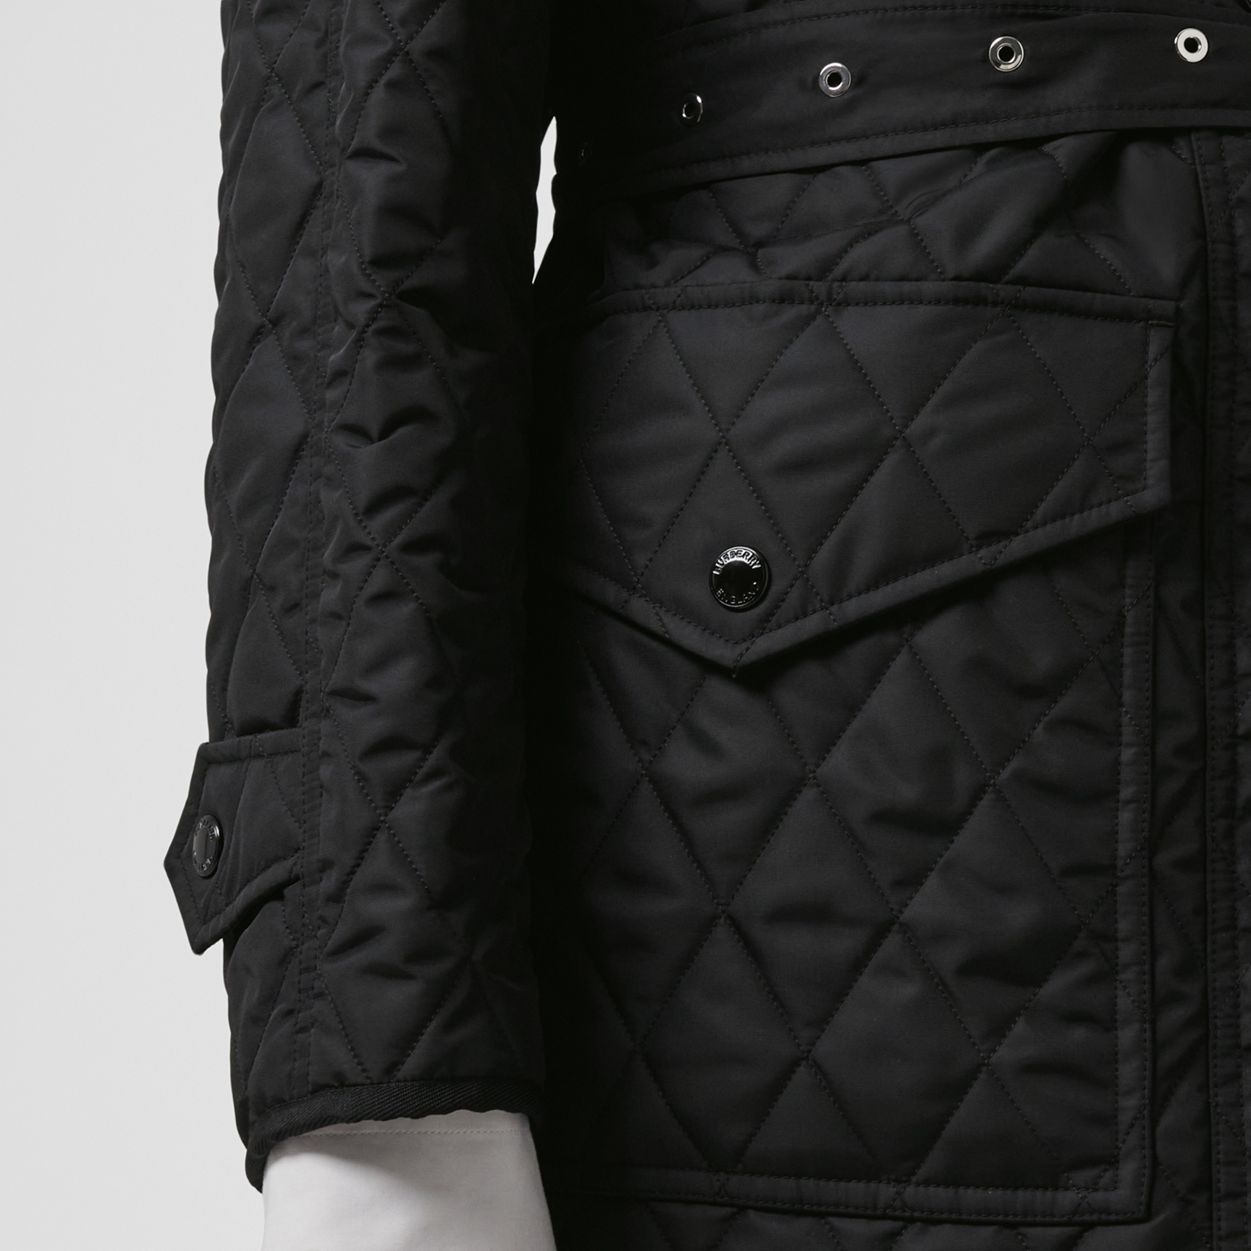 Diamond Quilted Nylon Canvas Field Jacket - 5